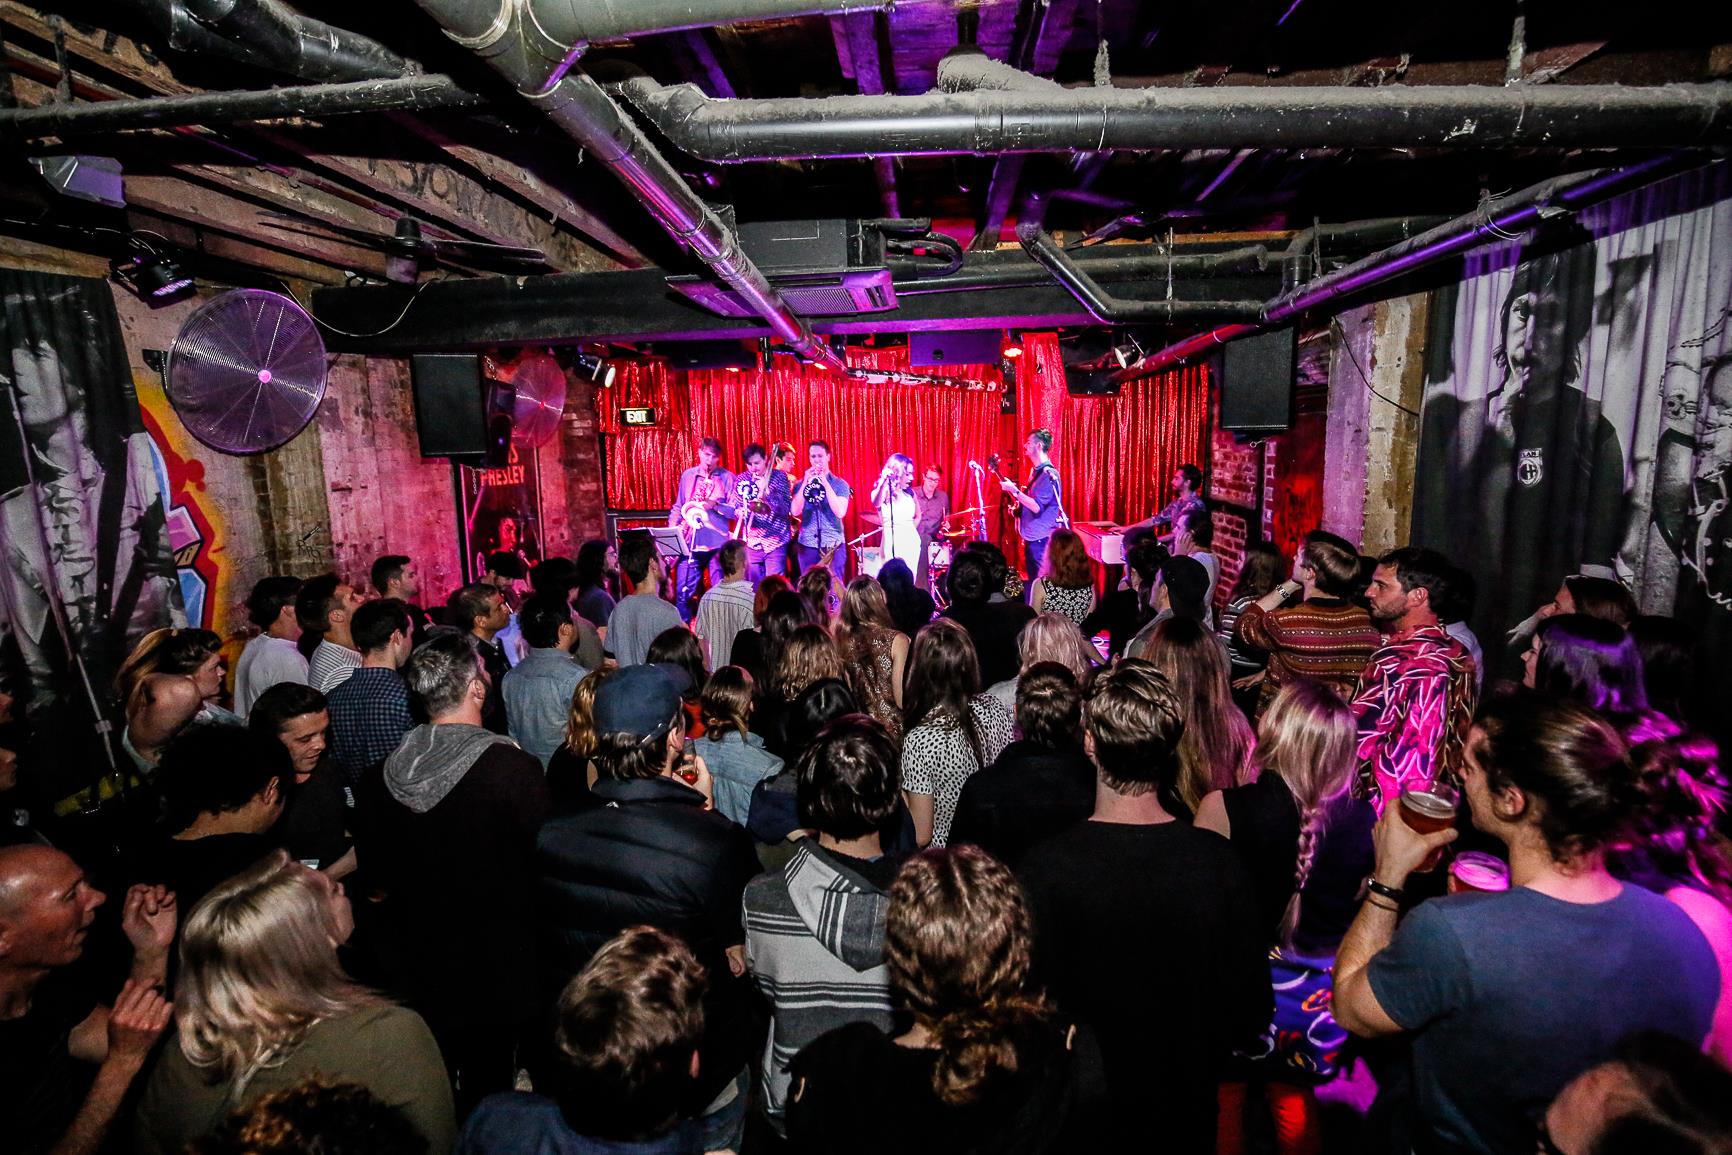 Melbourne’s Cherry Bar confirms it’s moving to a new location